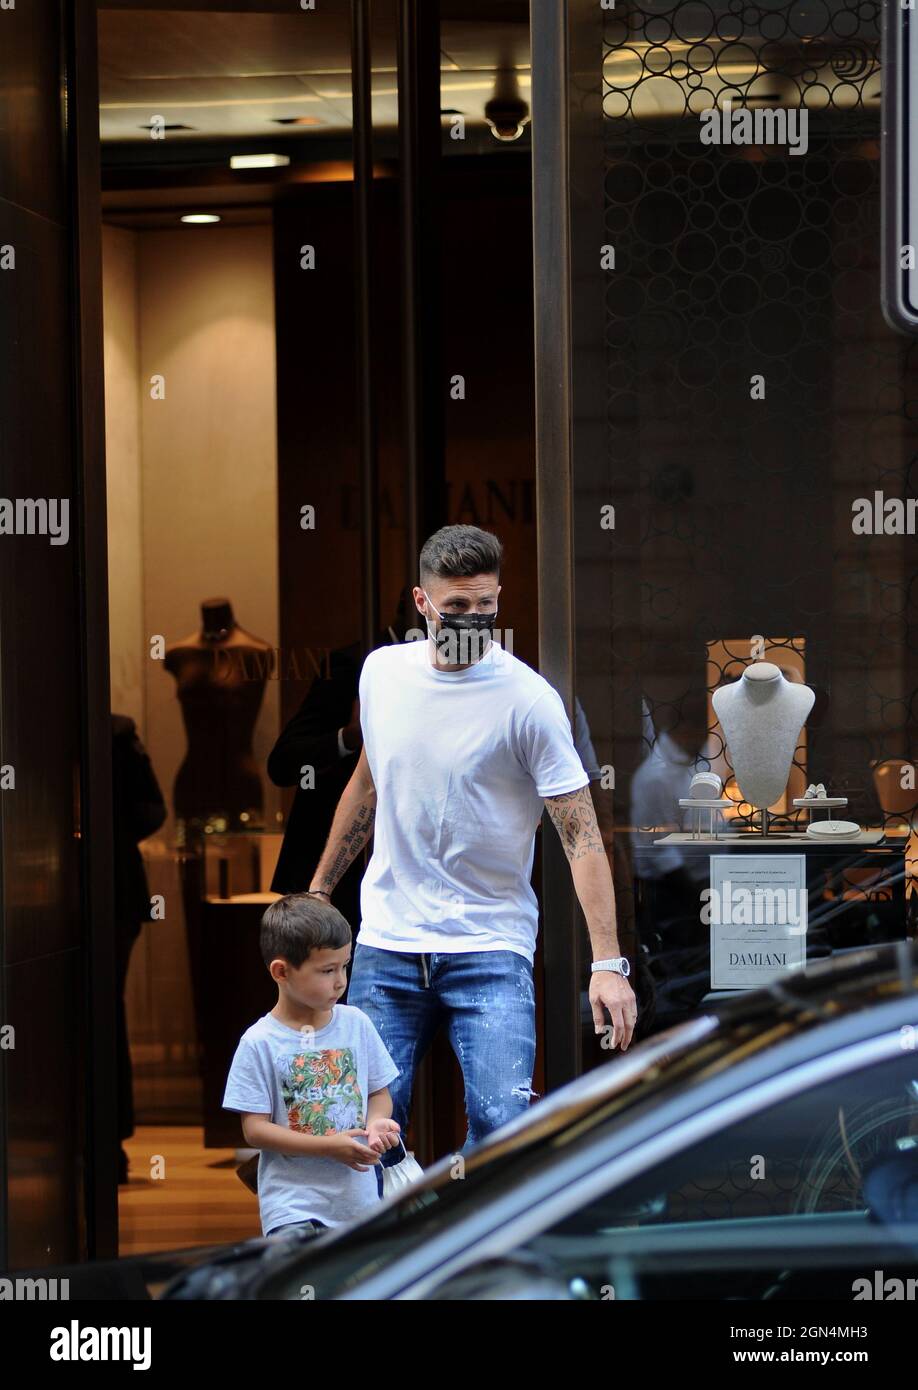 Milan, . 22nd Sep, 2021. Milan, 22-9-2021 Olivier Giroud, striker of Milan and the French national team, surprised in the center together with his son AAron - First they go to CHANEL, Olivier Giroud queues up and waits for his turn because he enters a little at a time But then many minutes pass and he decides to go to 'DAMIANI', the prestigious jewelry store in via Montenapoleone, to buy a bracelet and a necklace to give to his wife JENNIFER. When he leaves, he walks towards the parking lot to pick up his Ferrari and go home. EXCLUSIVE SERVICE Credit: Independent Photo Agency/Alamy Live News Stock Photo